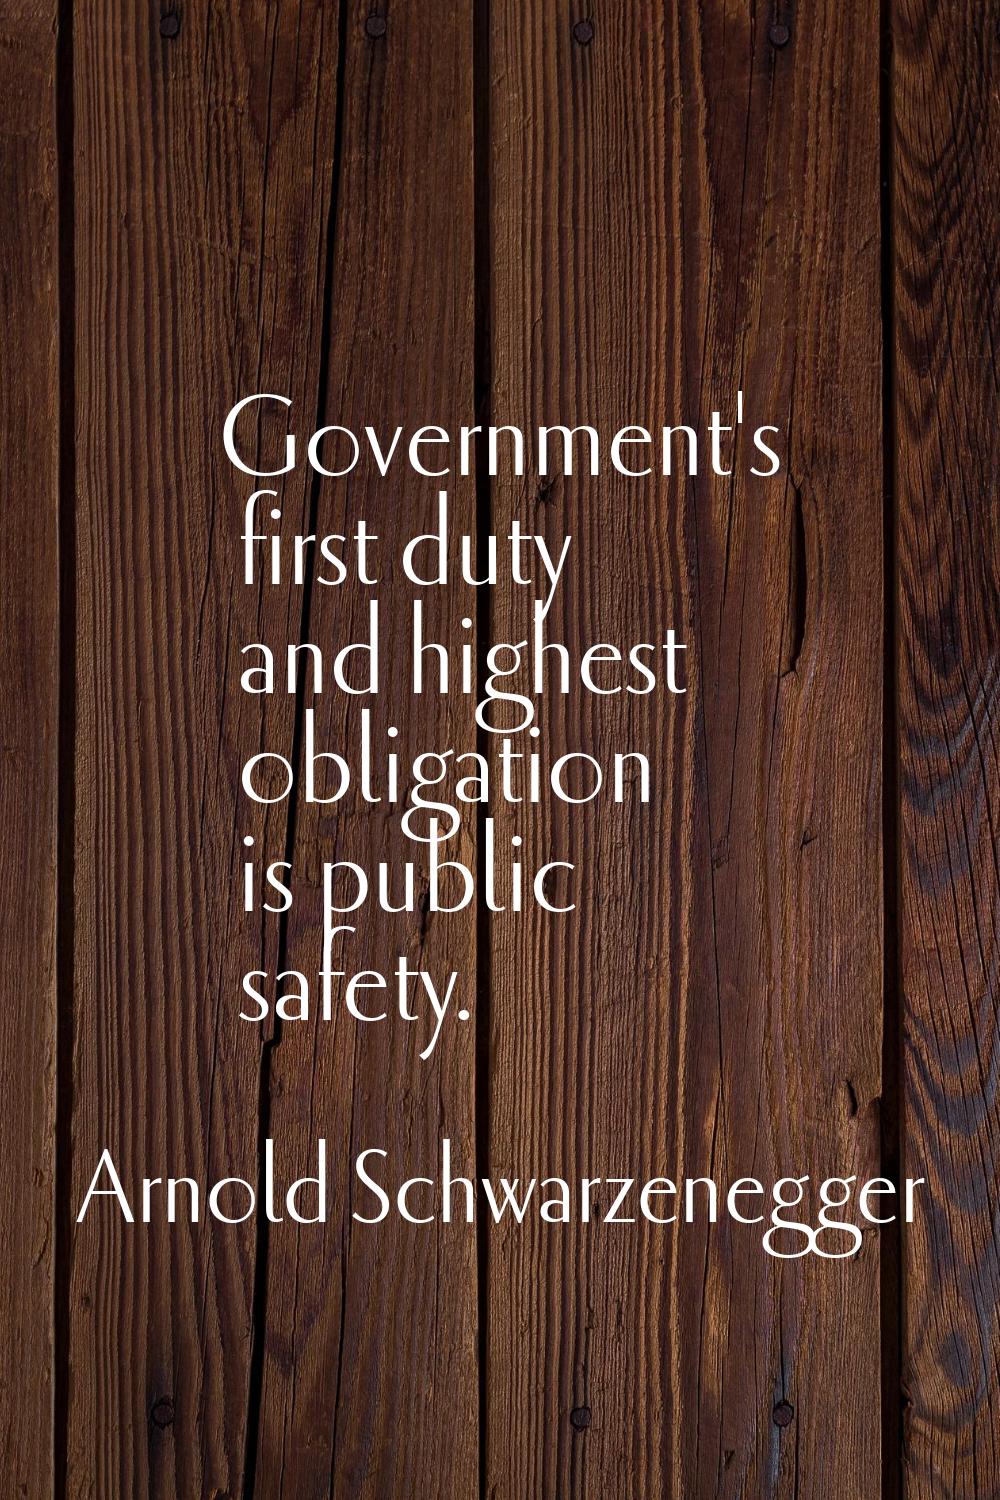 Government's first duty and highest obligation is public safety.